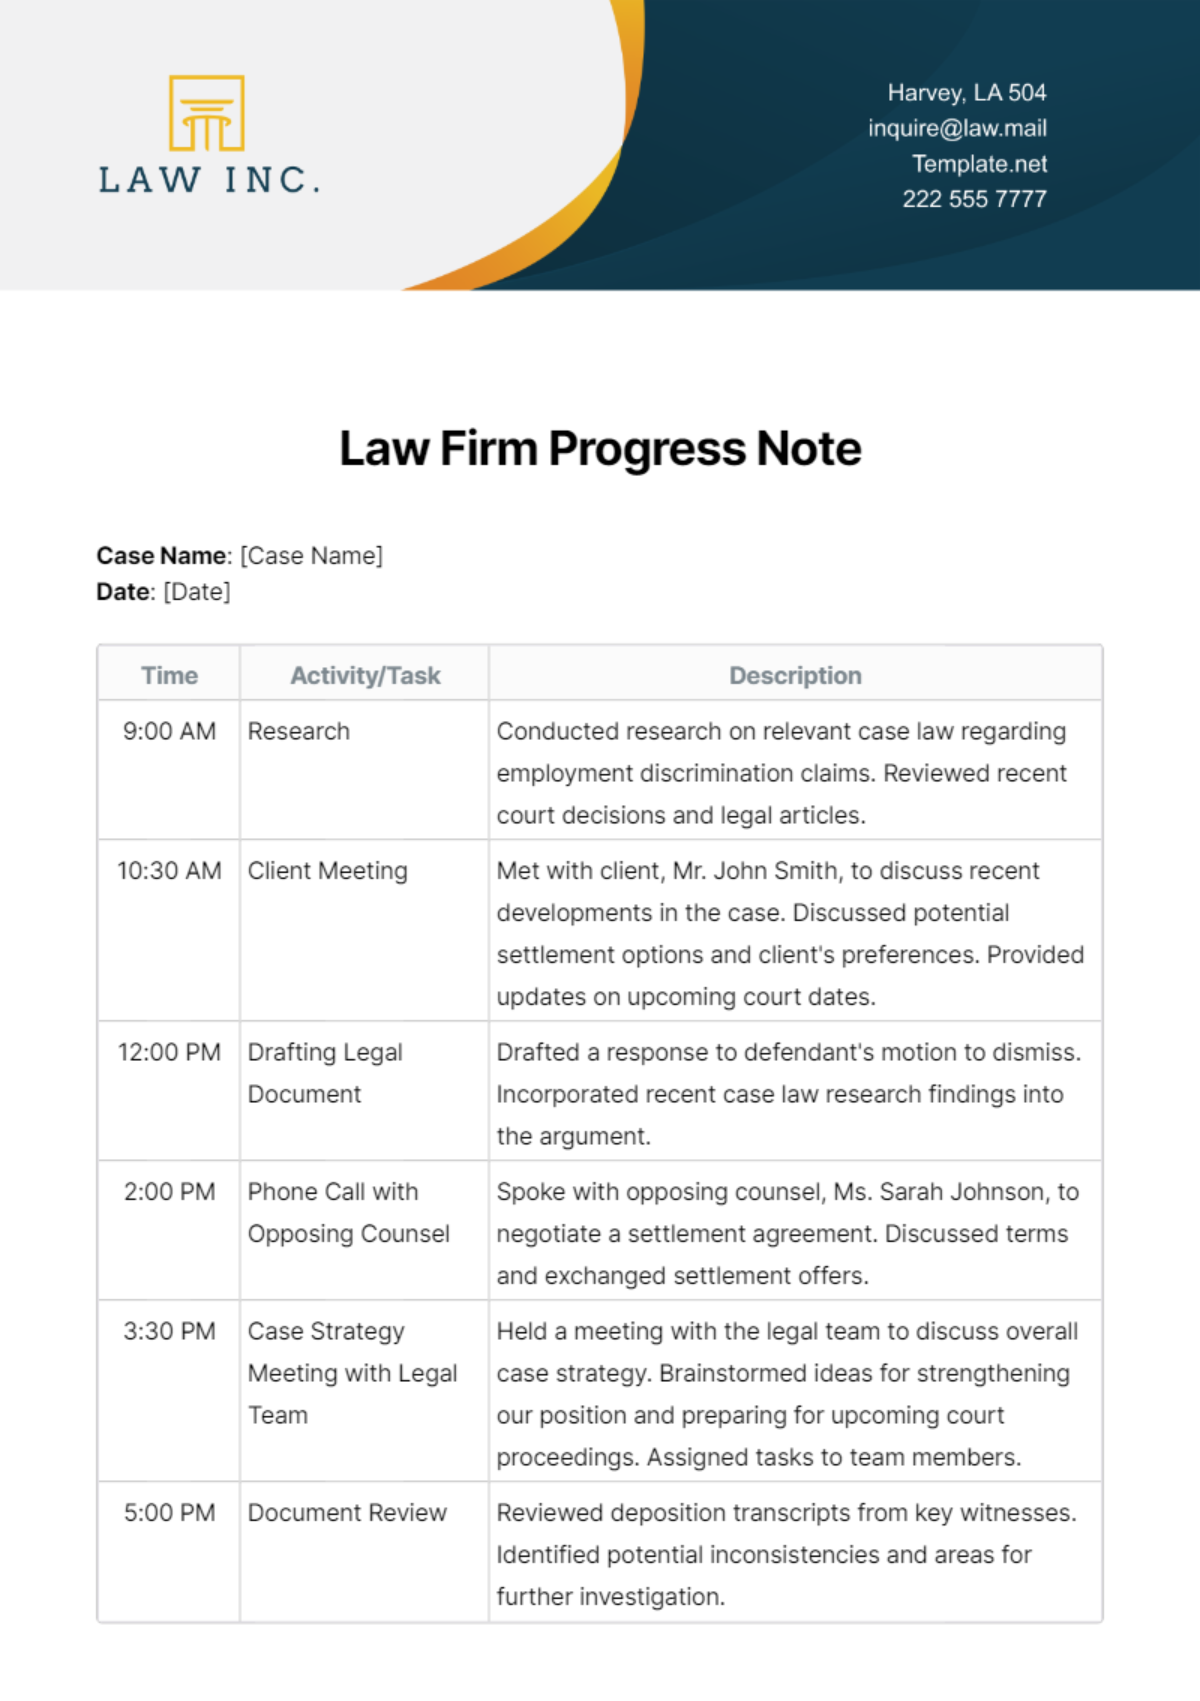 Law Firm Progress Note Template